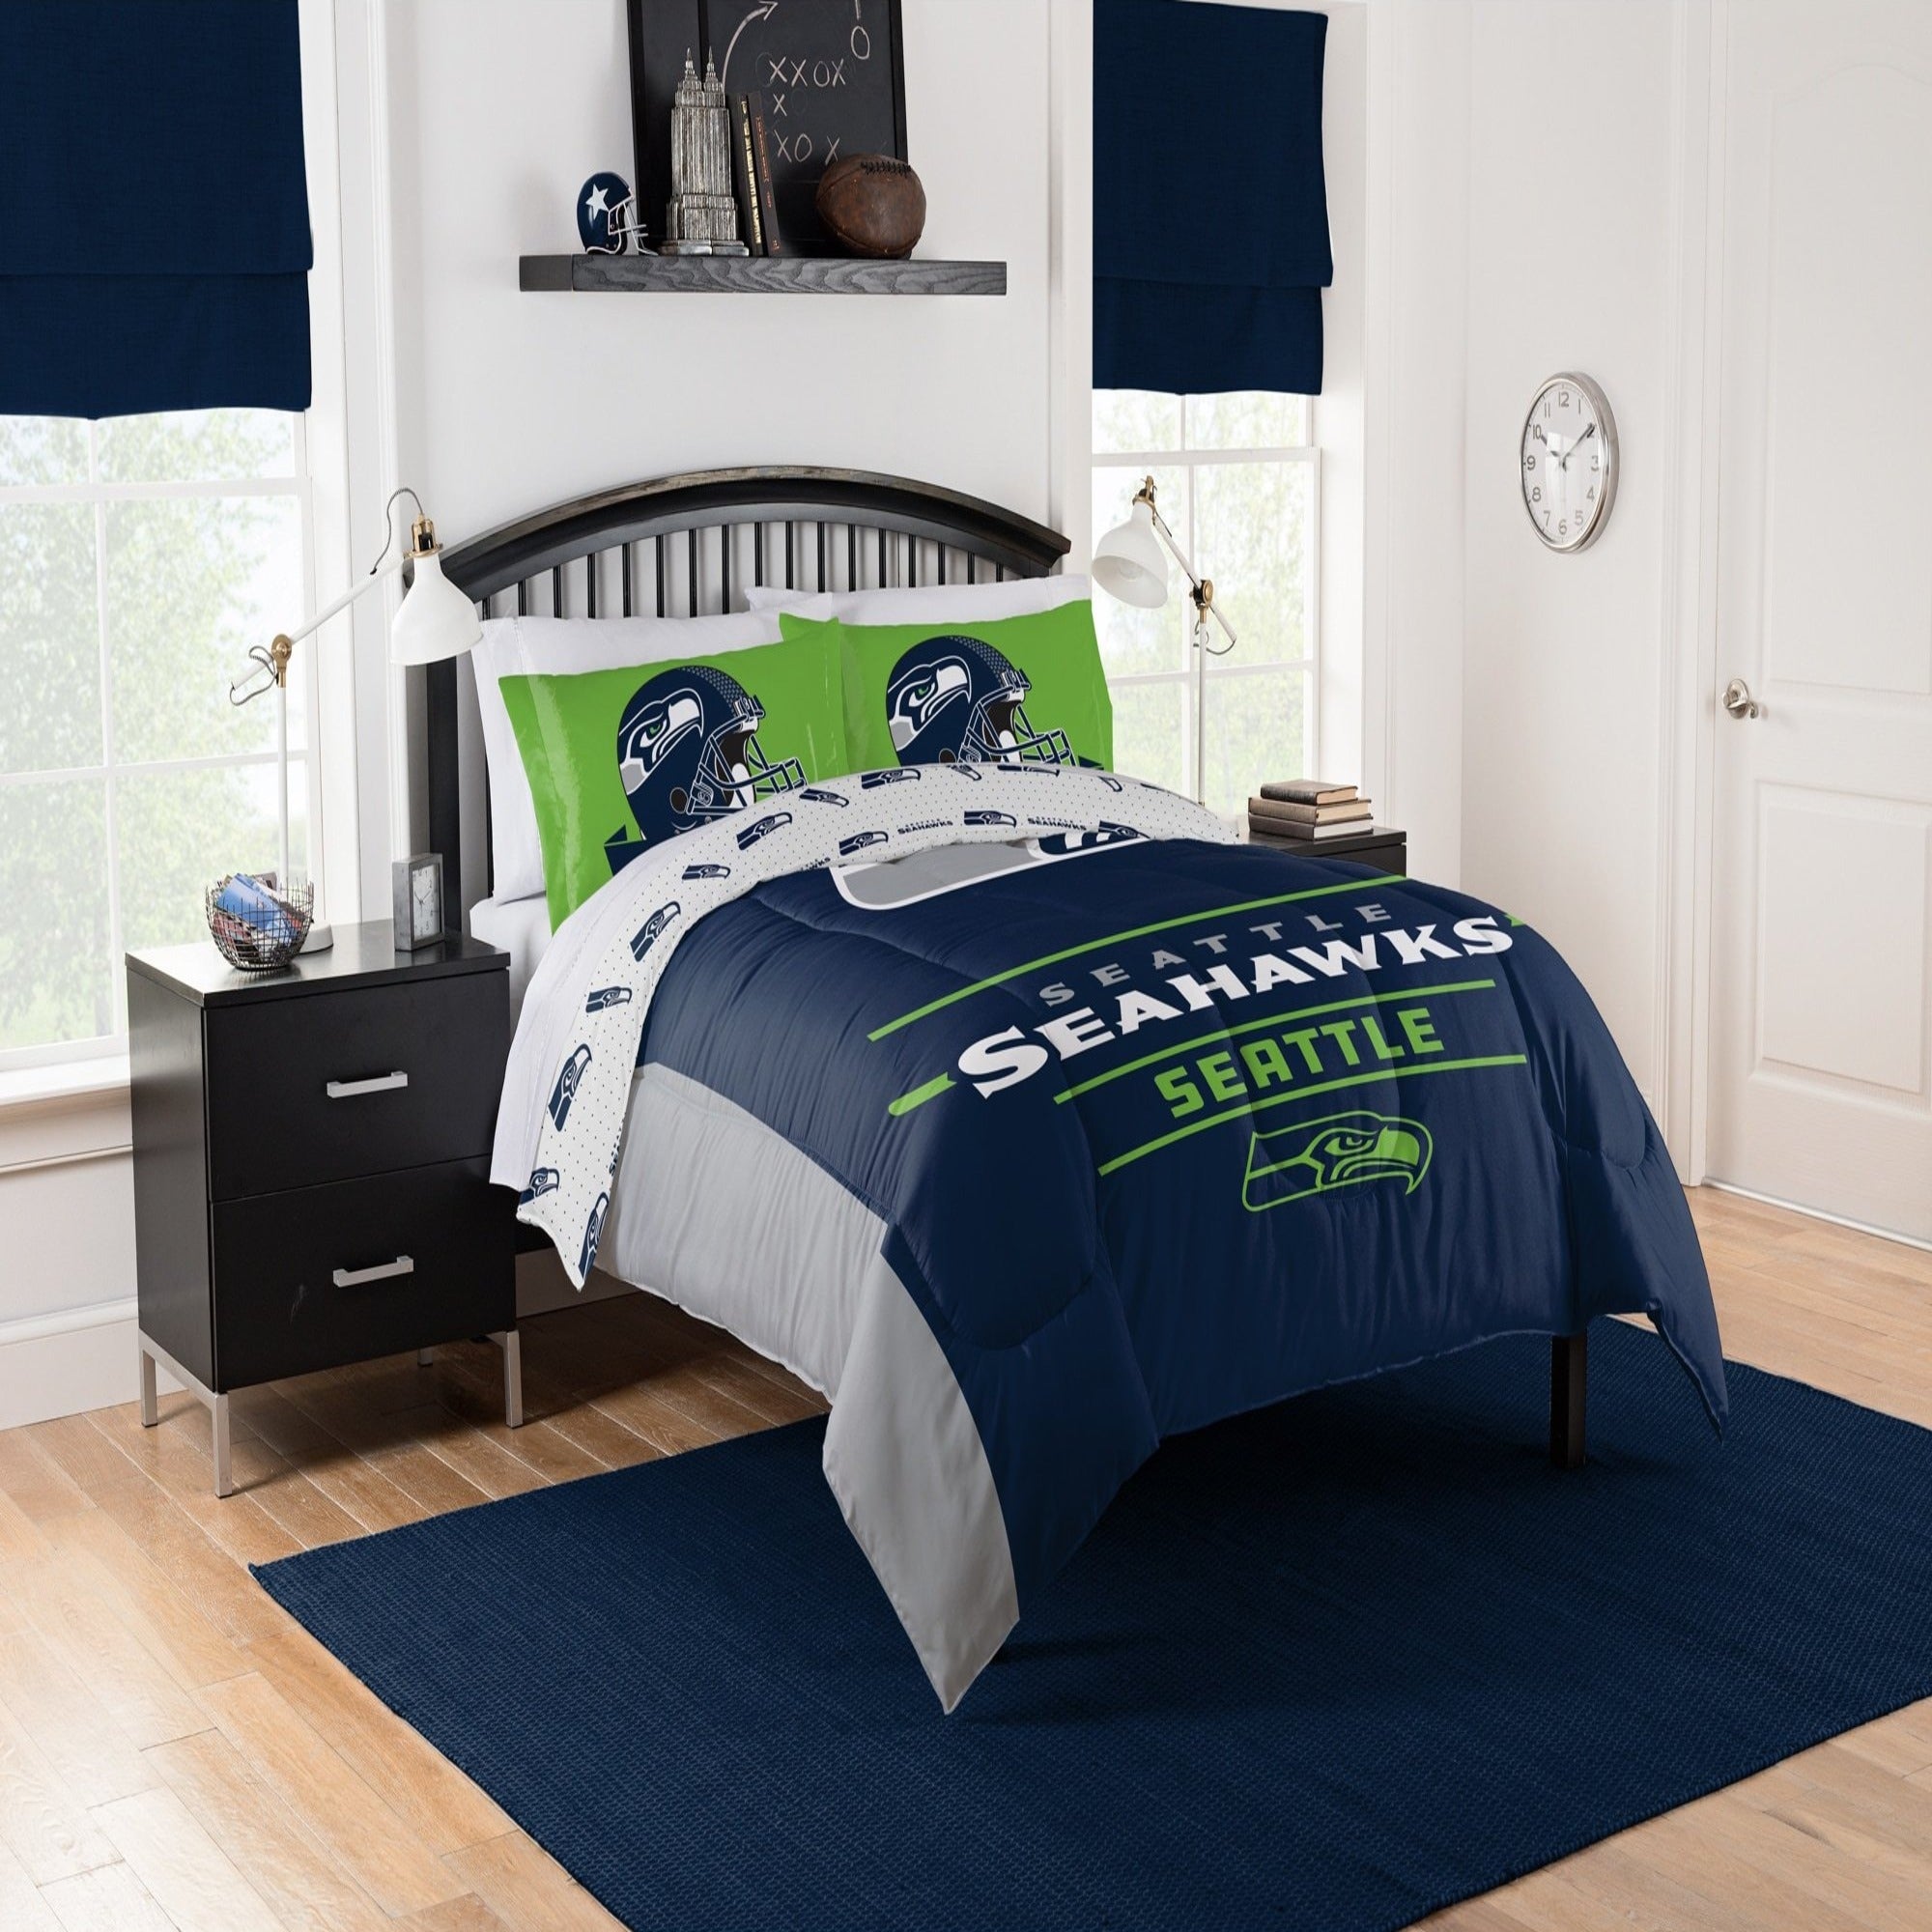 NFL SEATTLE SEAHAWKS 3PC COMFORTER SET SUPER SOFT, BREATHABLE, HYPOALLERGENIC, FADE RESISTANT - QUEEN SIZE WITH 2 PILLOW SHAMS